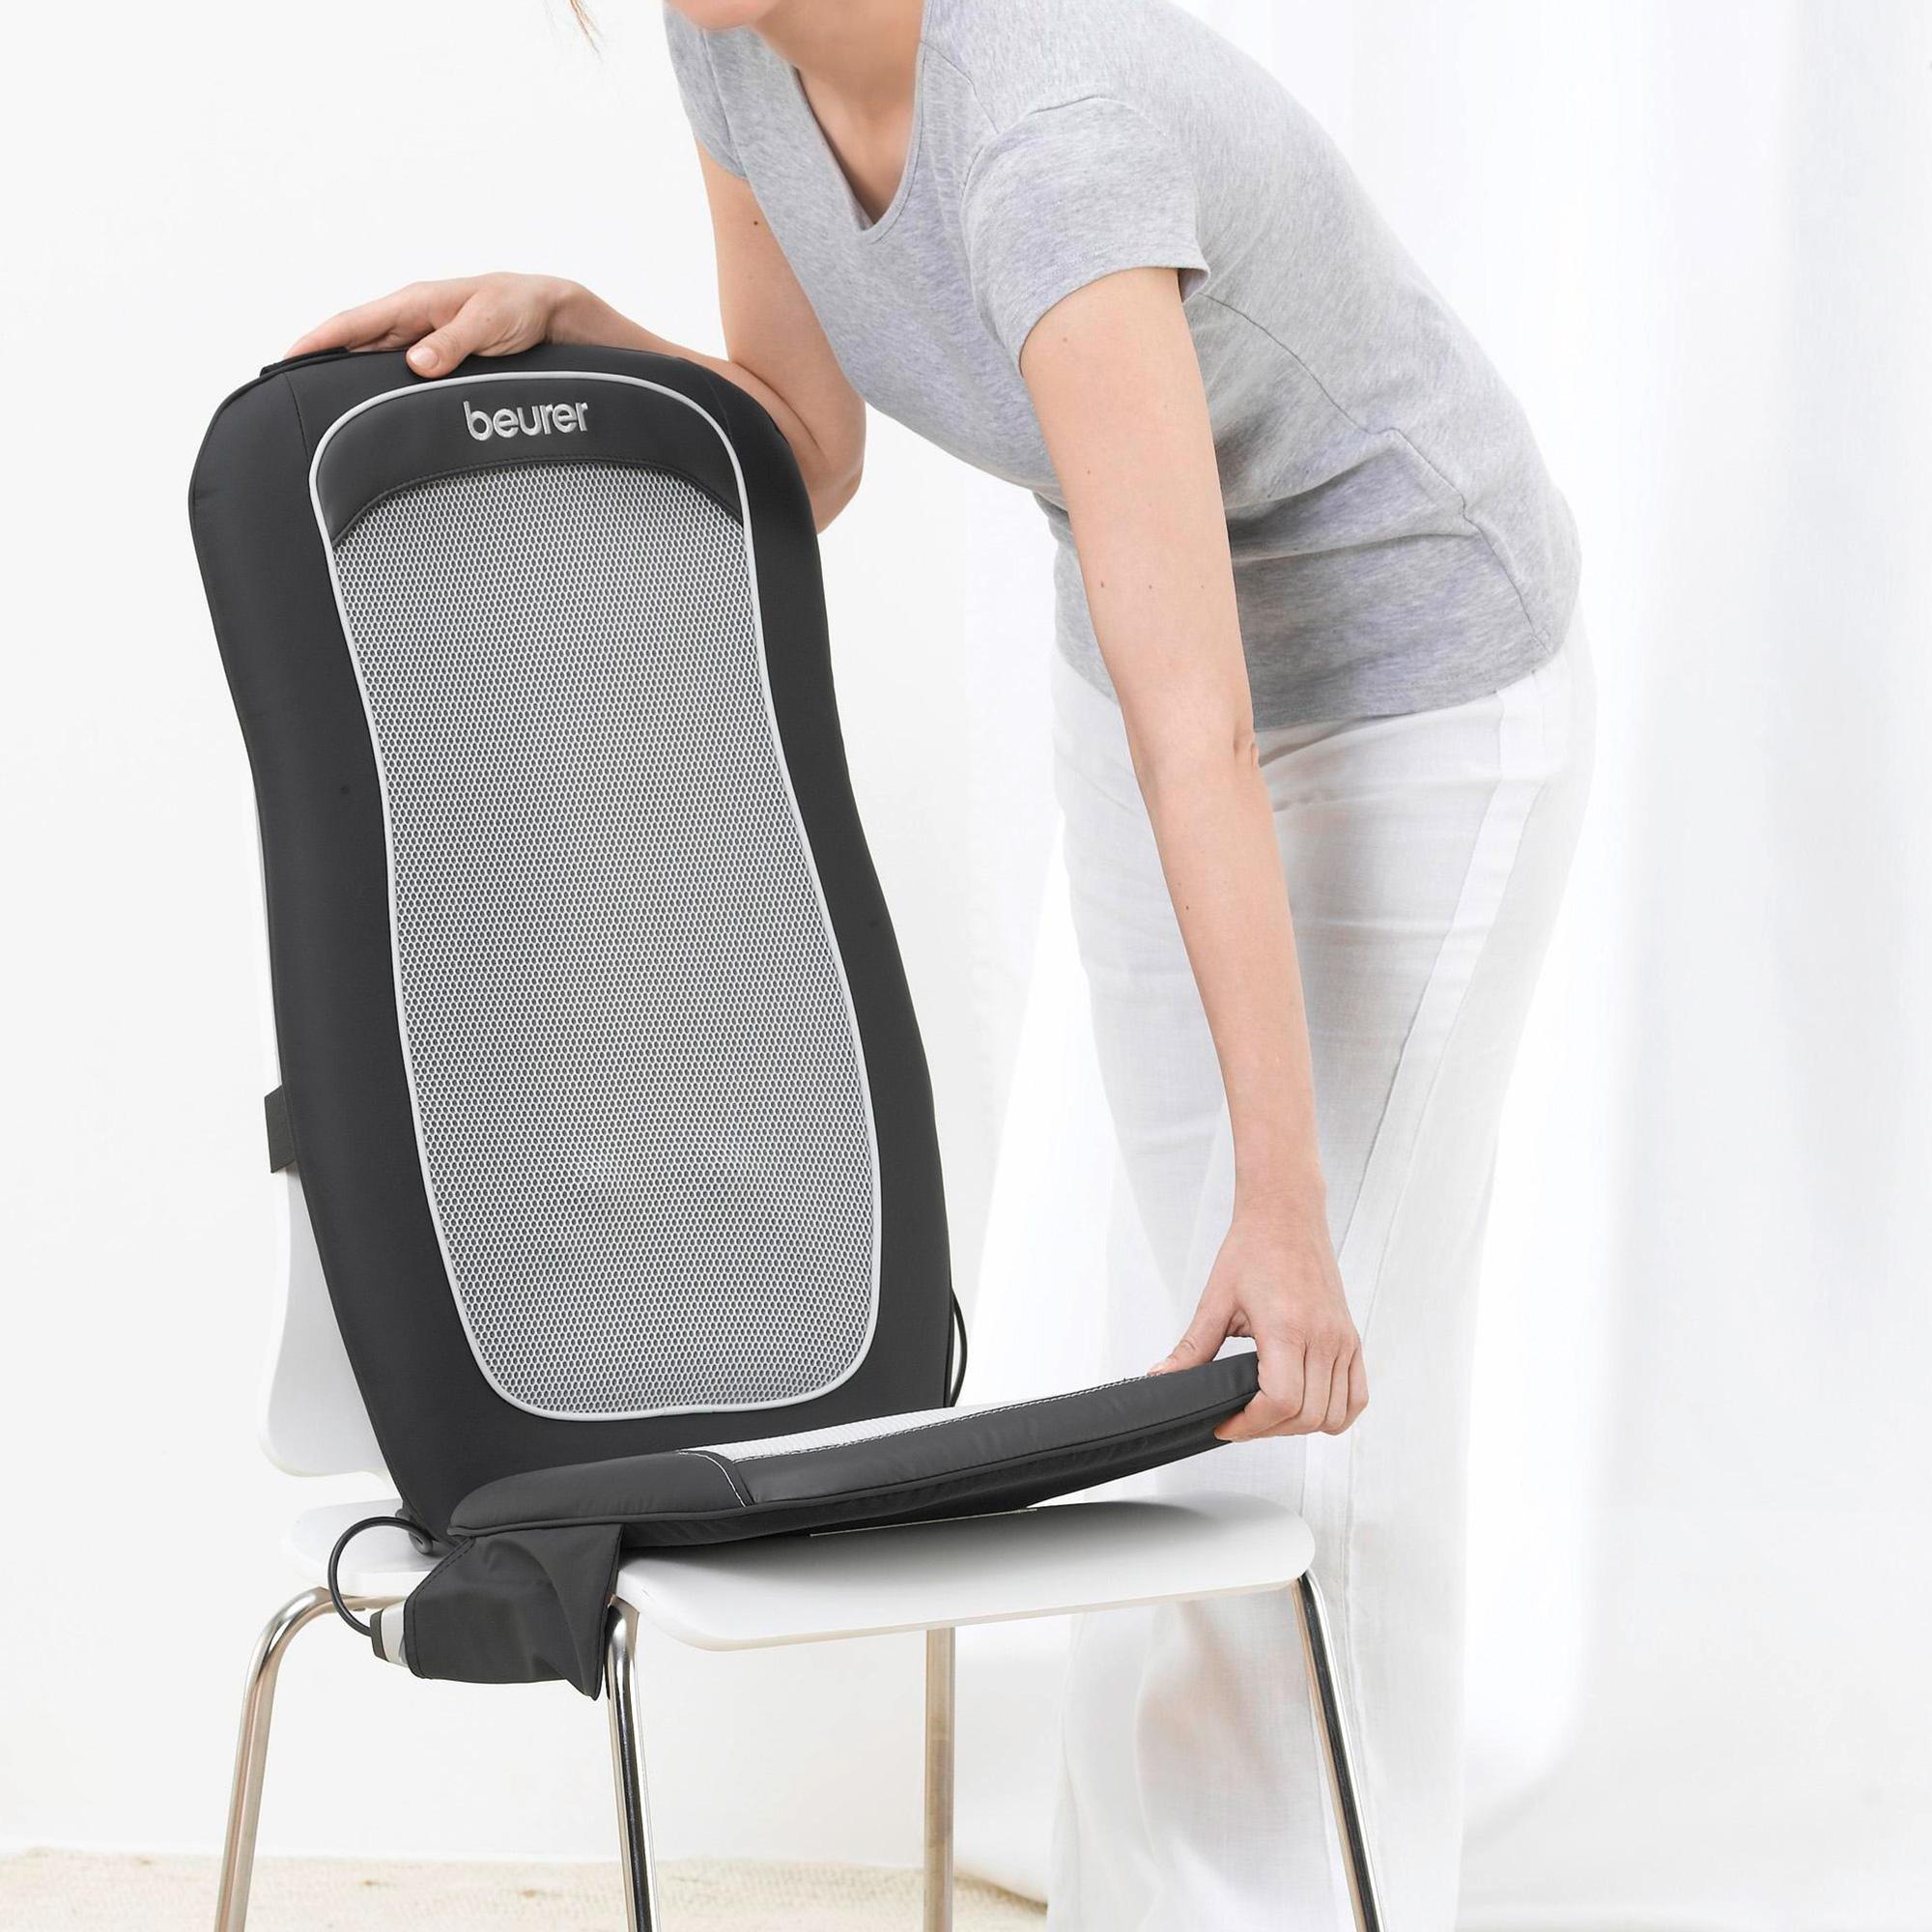 Beurer Shiatsu Massage Seat Cover with Removable Seat Cushion Image 3